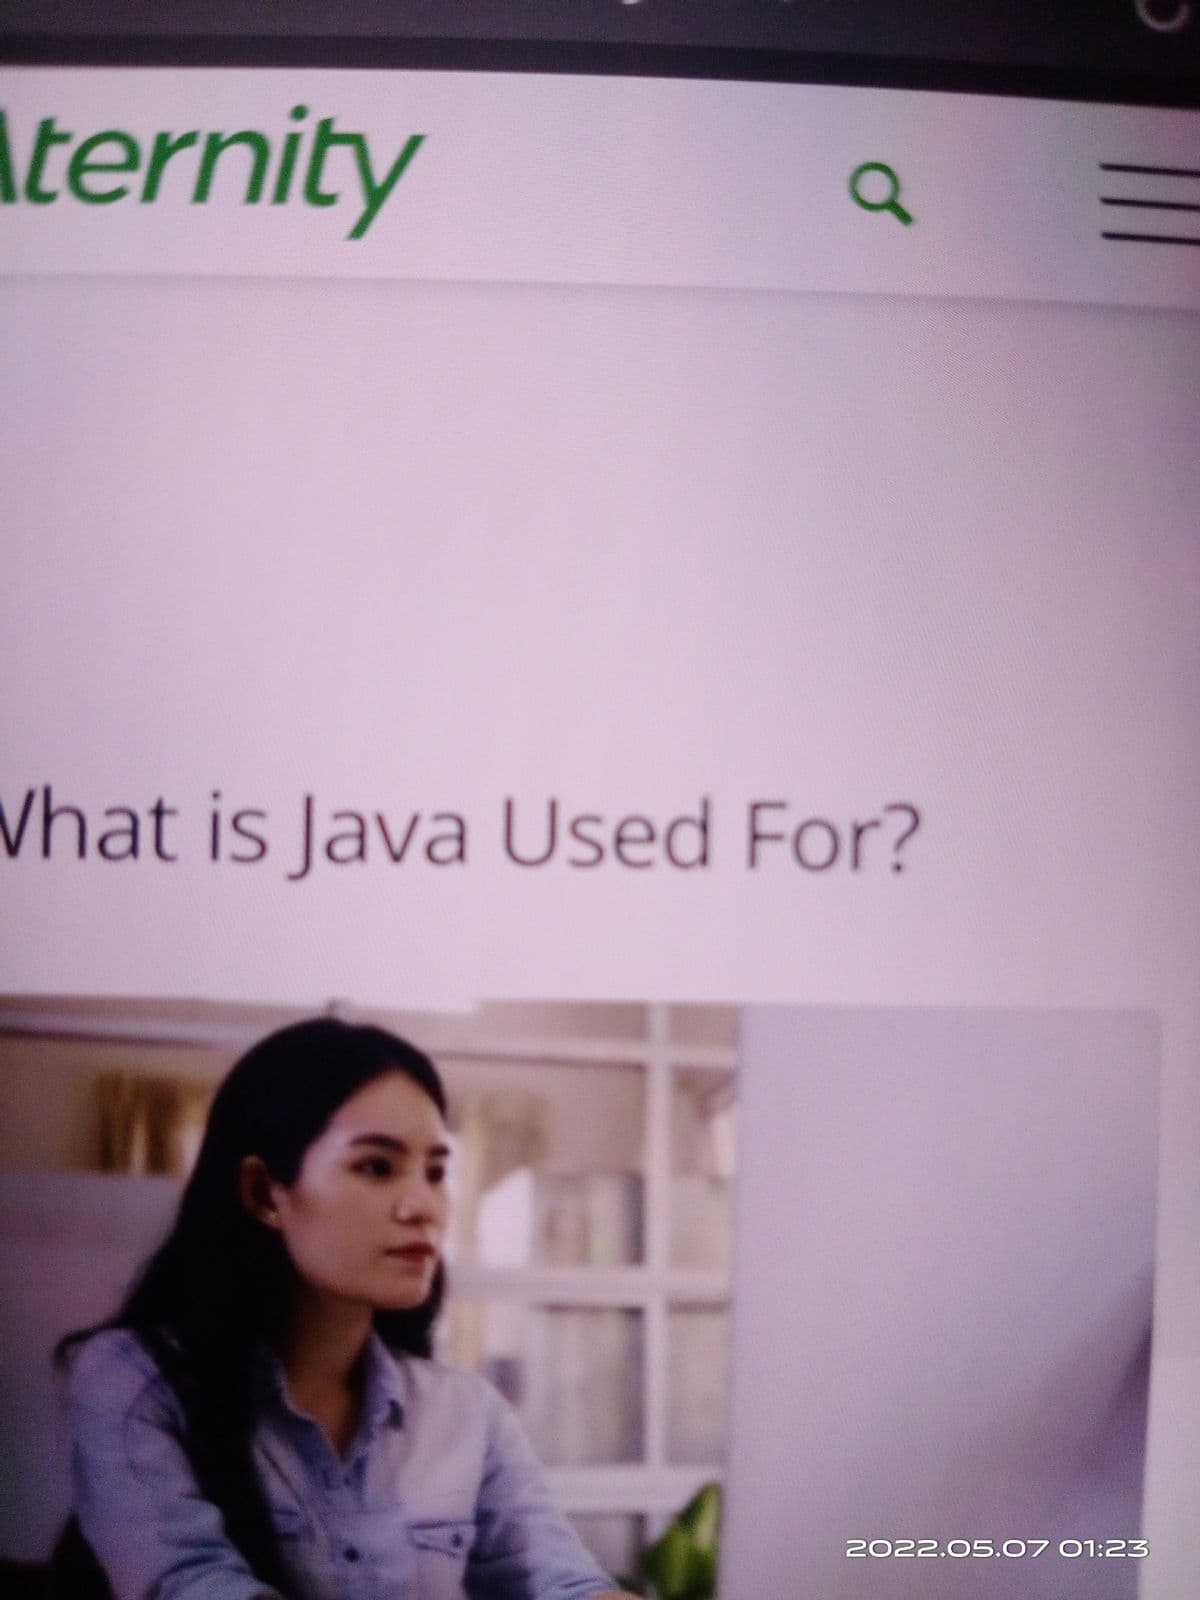 \ternity
What is Java Used For?
2022.05.07 01:23
